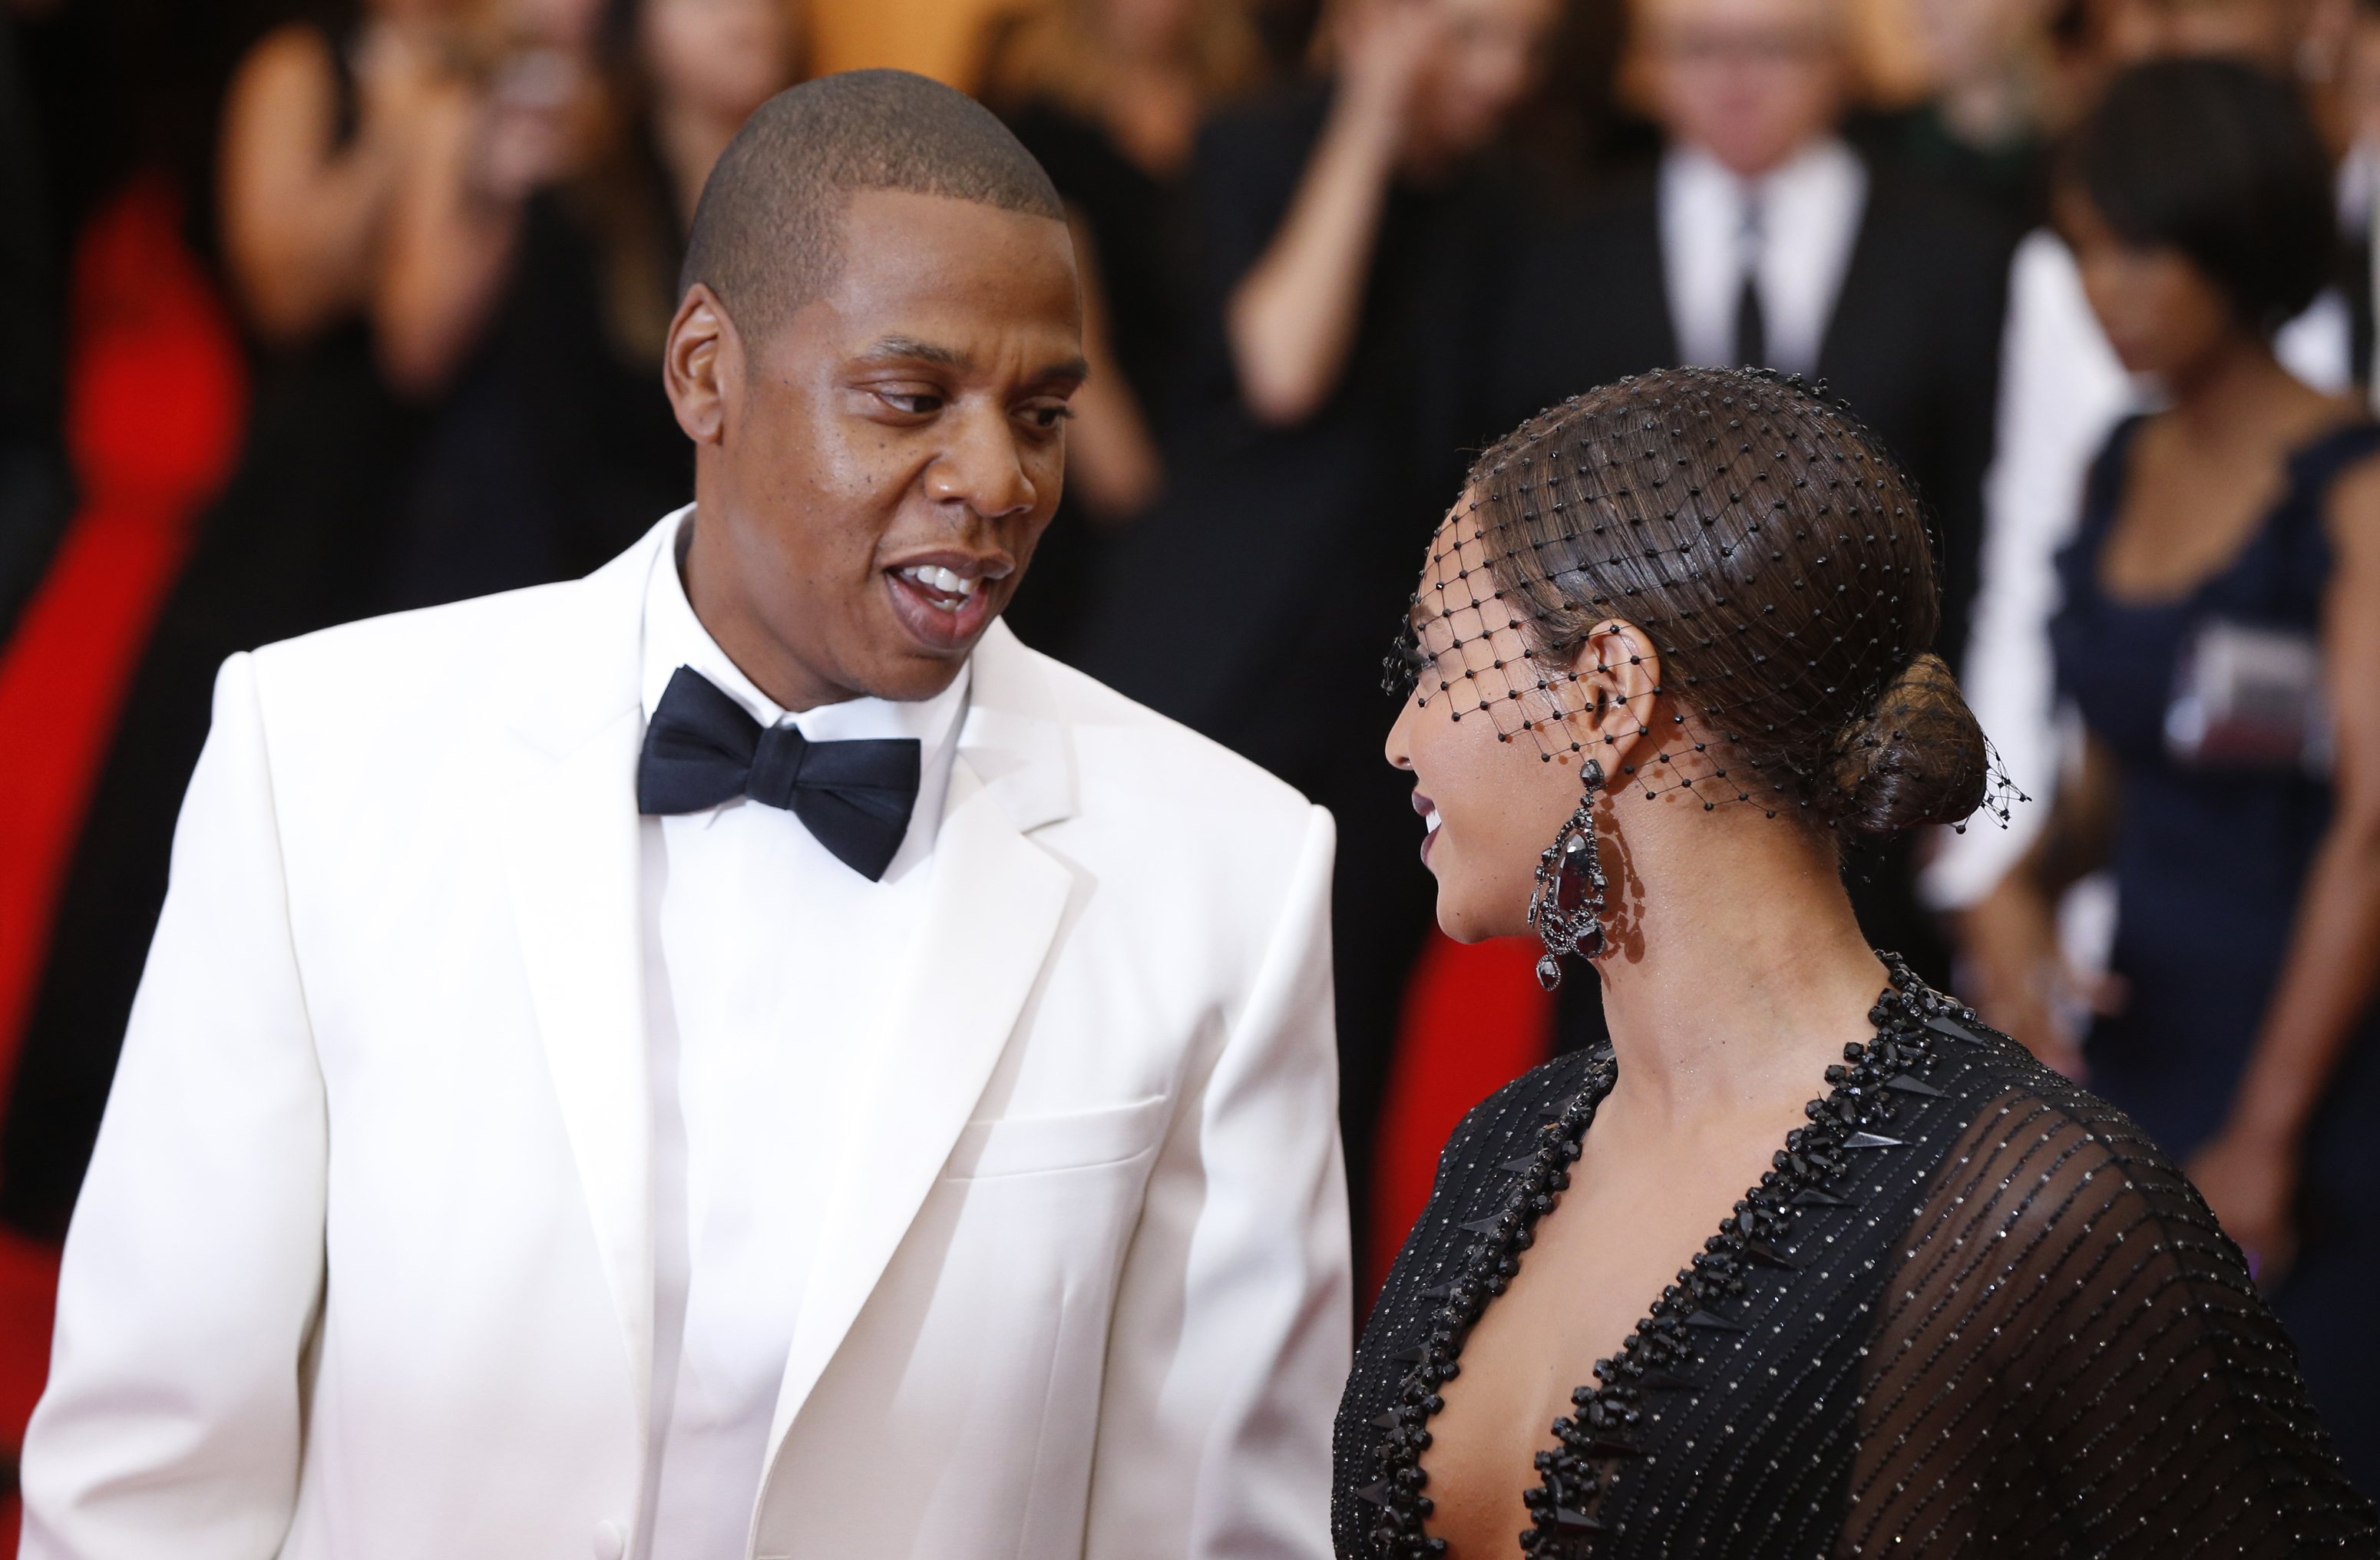 Jay Z and Beyonce Knowles arrive at the Metropolitan Museum of Art Costume Institute Gala Benefit celebrating the opening of "Charles James: Beyond Fashion" in New York